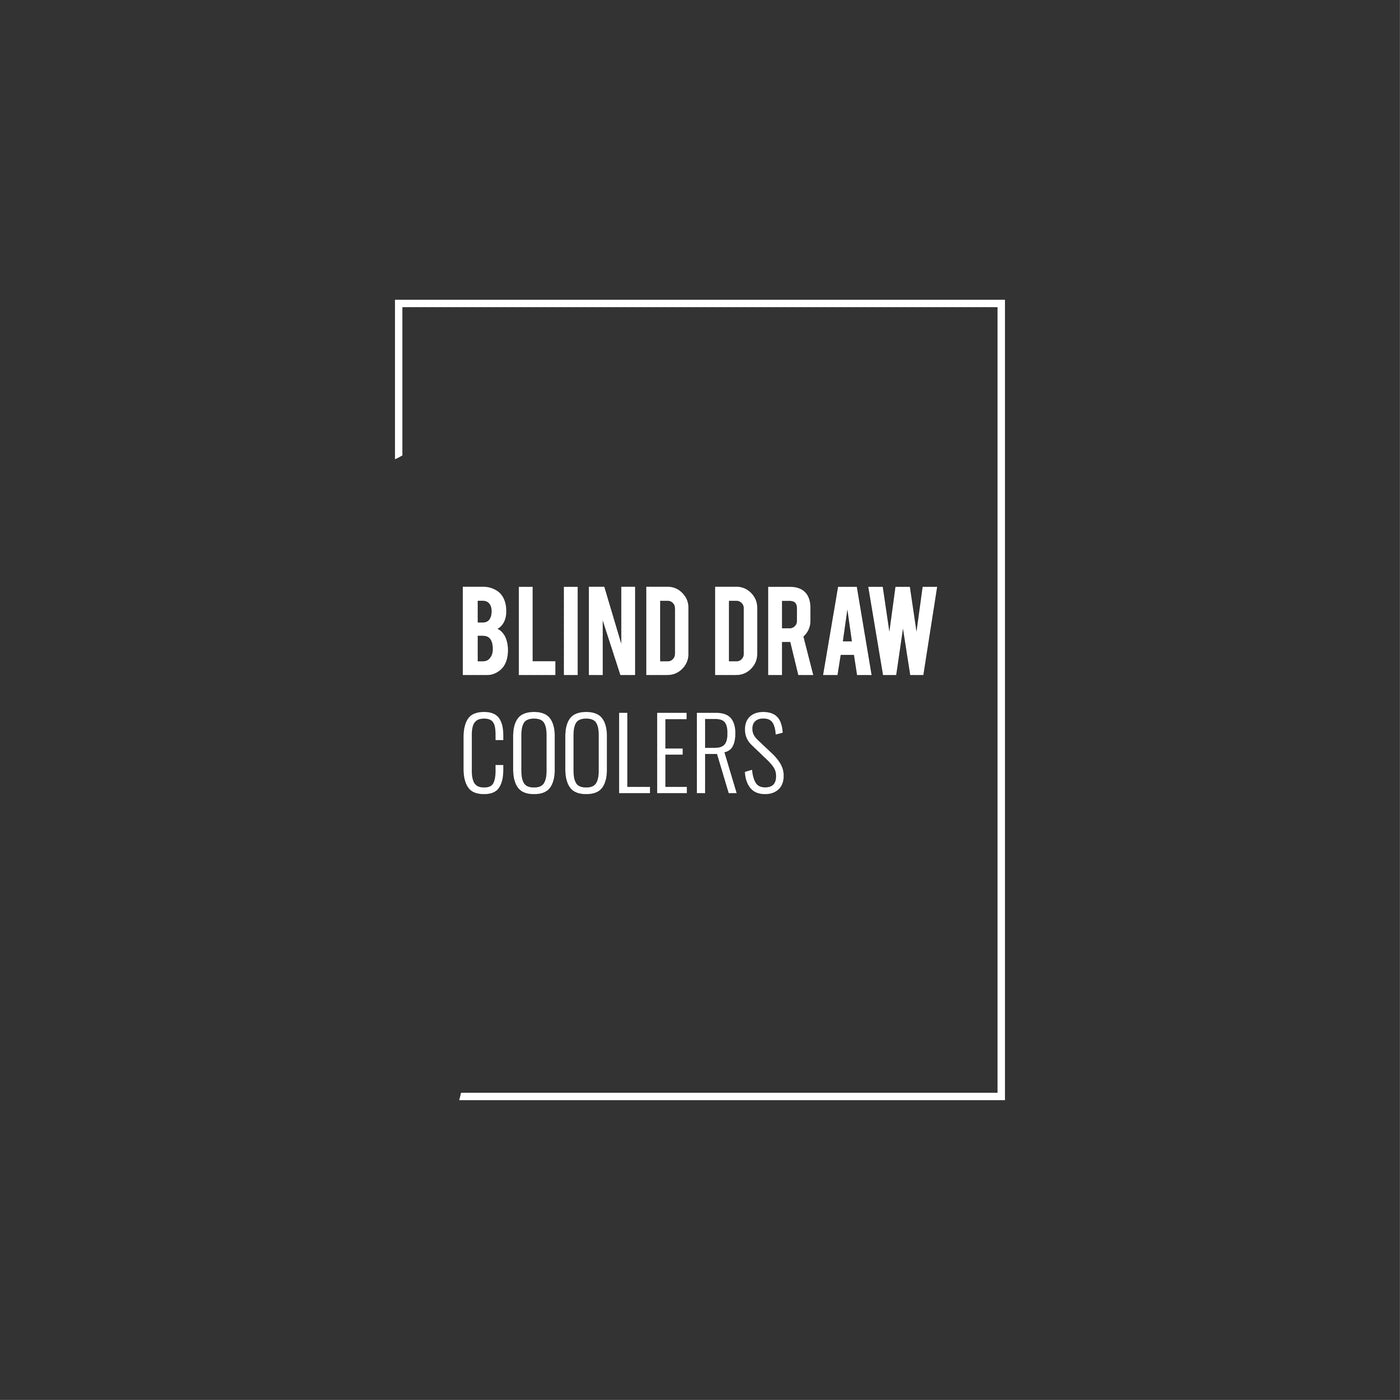 Blind Draw Coolers